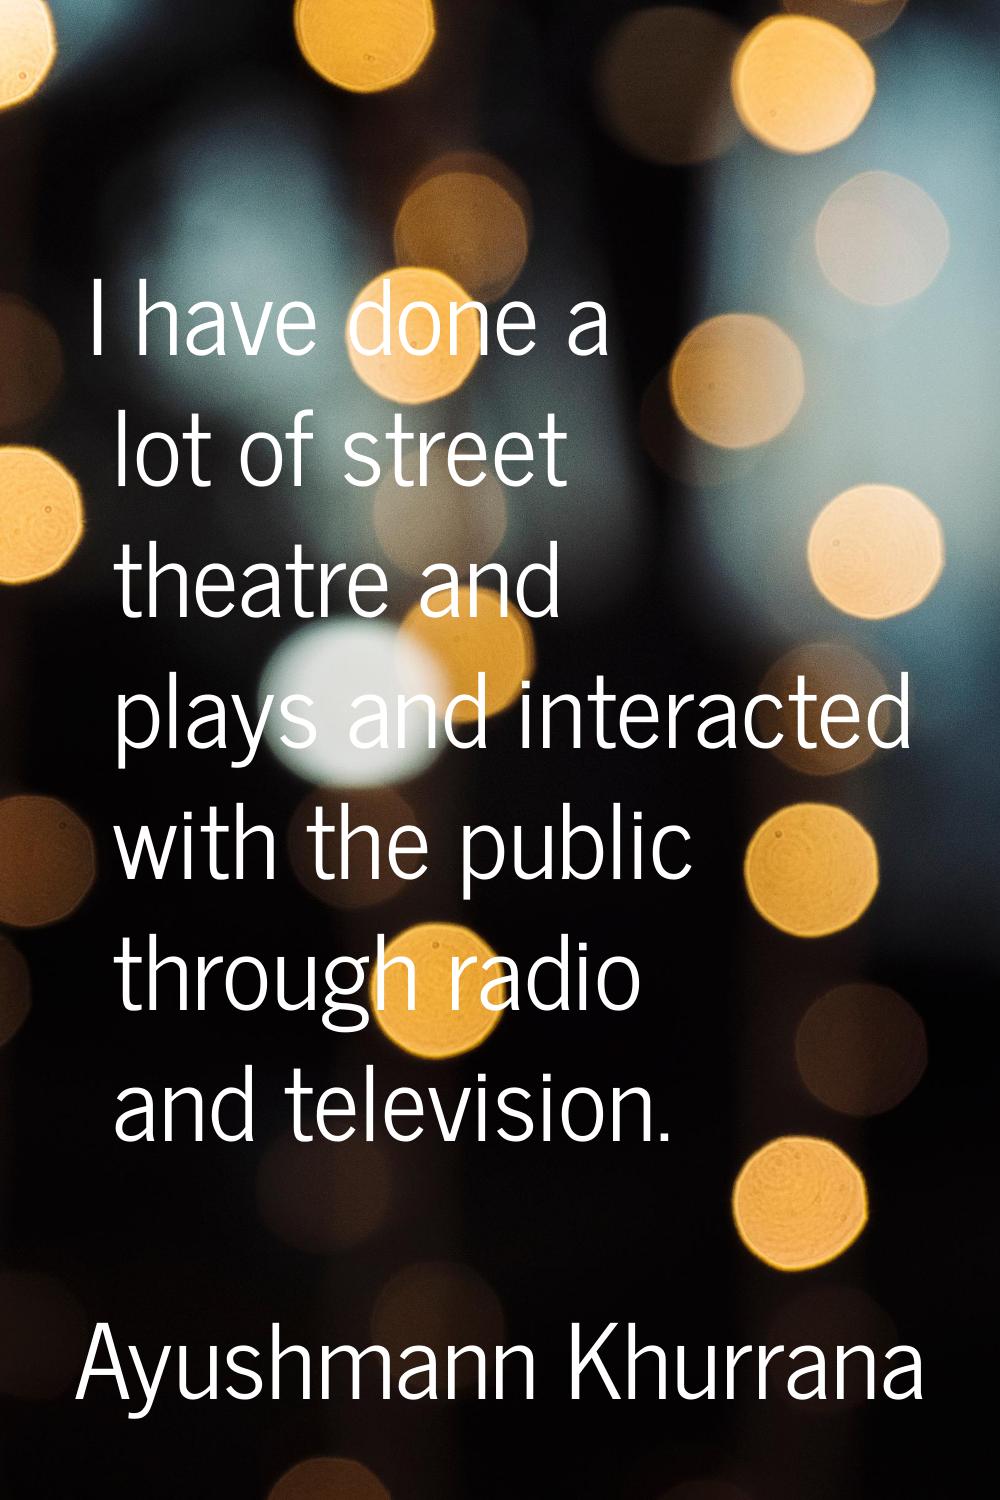 I have done a lot of street theatre and plays and interacted with the public through radio and tele